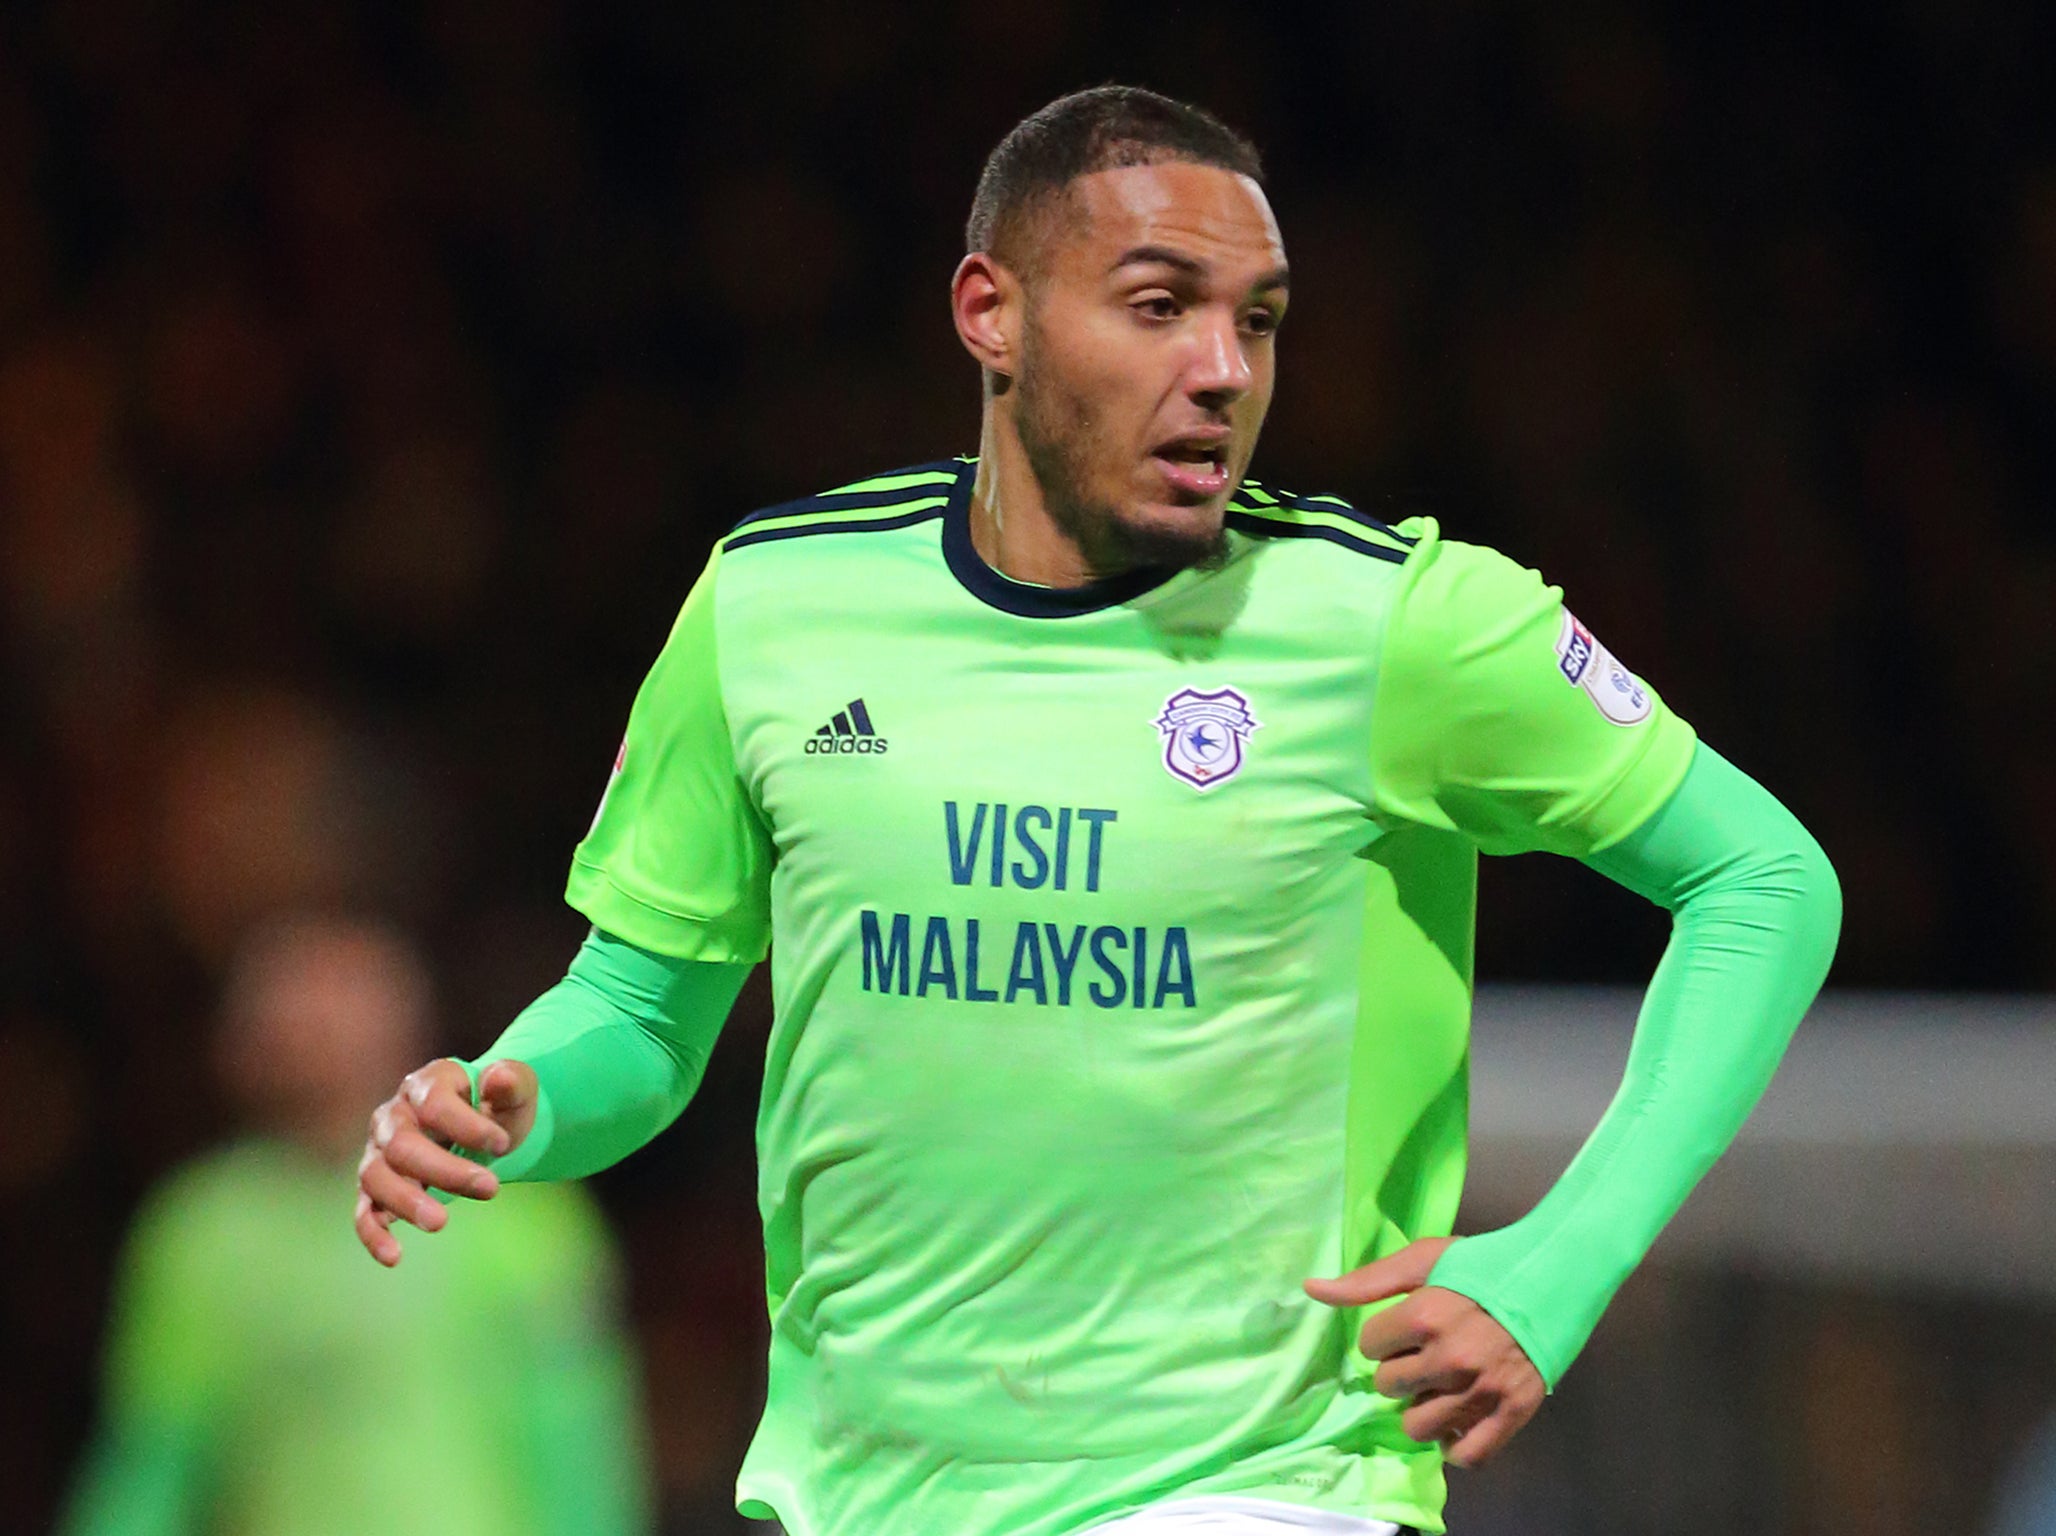 Kenneth Zohore struck the winning goal for Cardiff